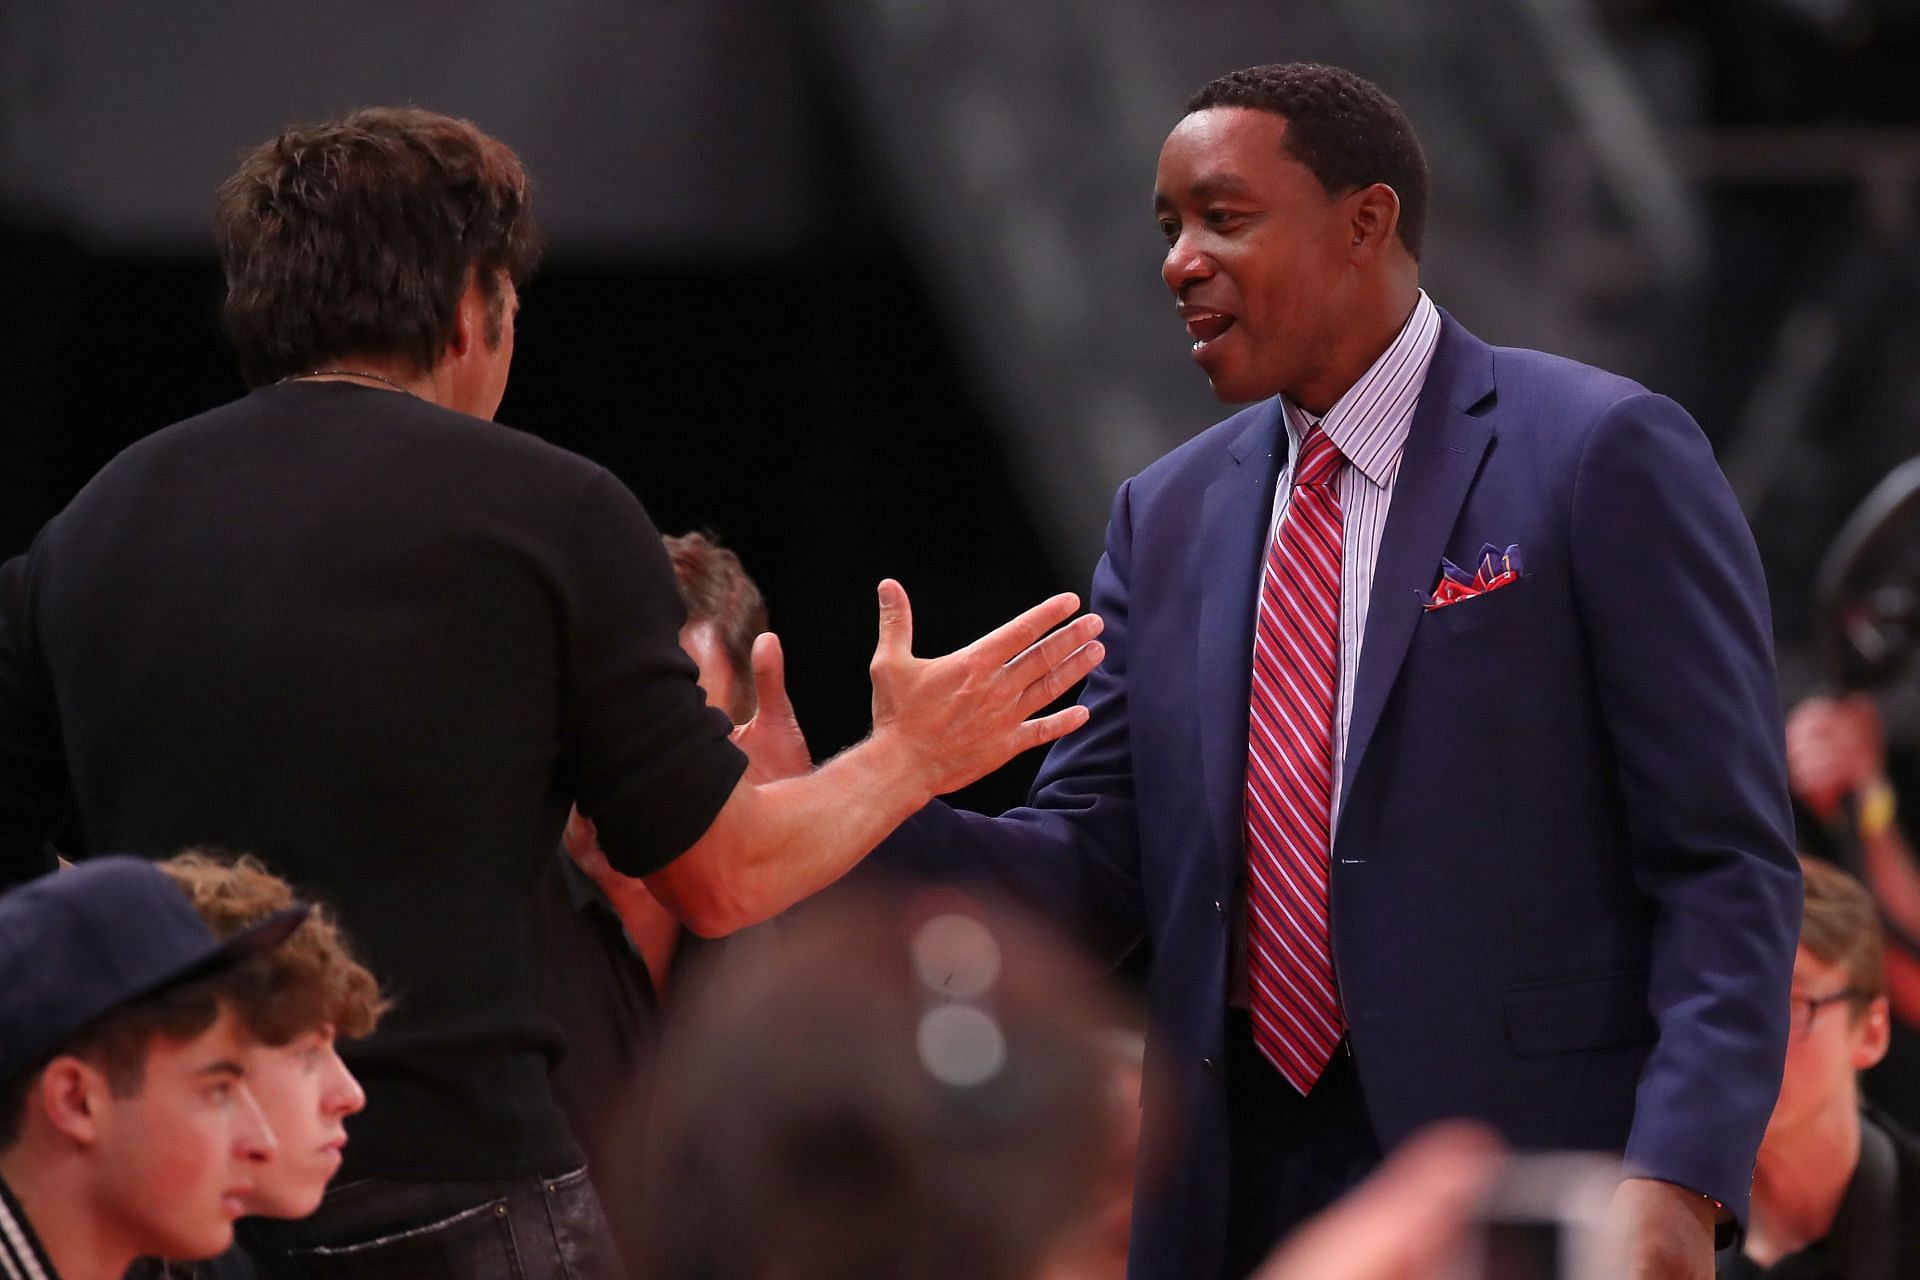 Former Detroit Piston Isiah Thomas talks with team owner Tom Gores prior to playing the Brooklyn Nets at the home opener at Little Caesars Arena on October 17, 2018 in Detroit, Michigan.